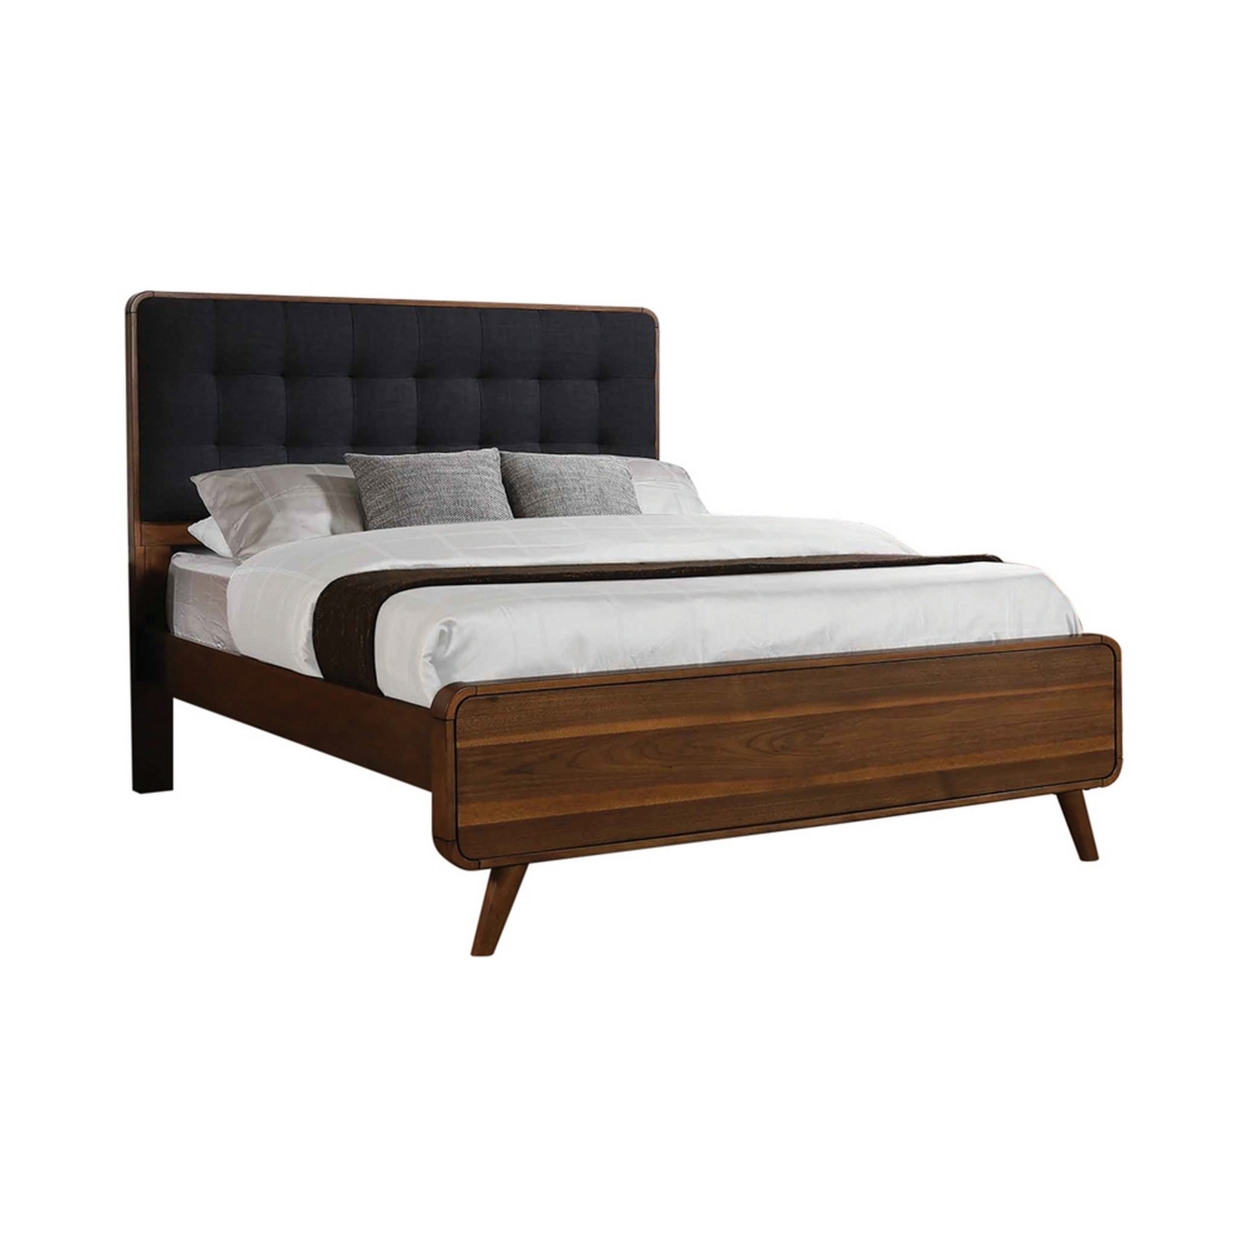 Platform Style Square Tufting Queen Bed With Rounded Corners,Brown And Gray- Saltoro Sherpi